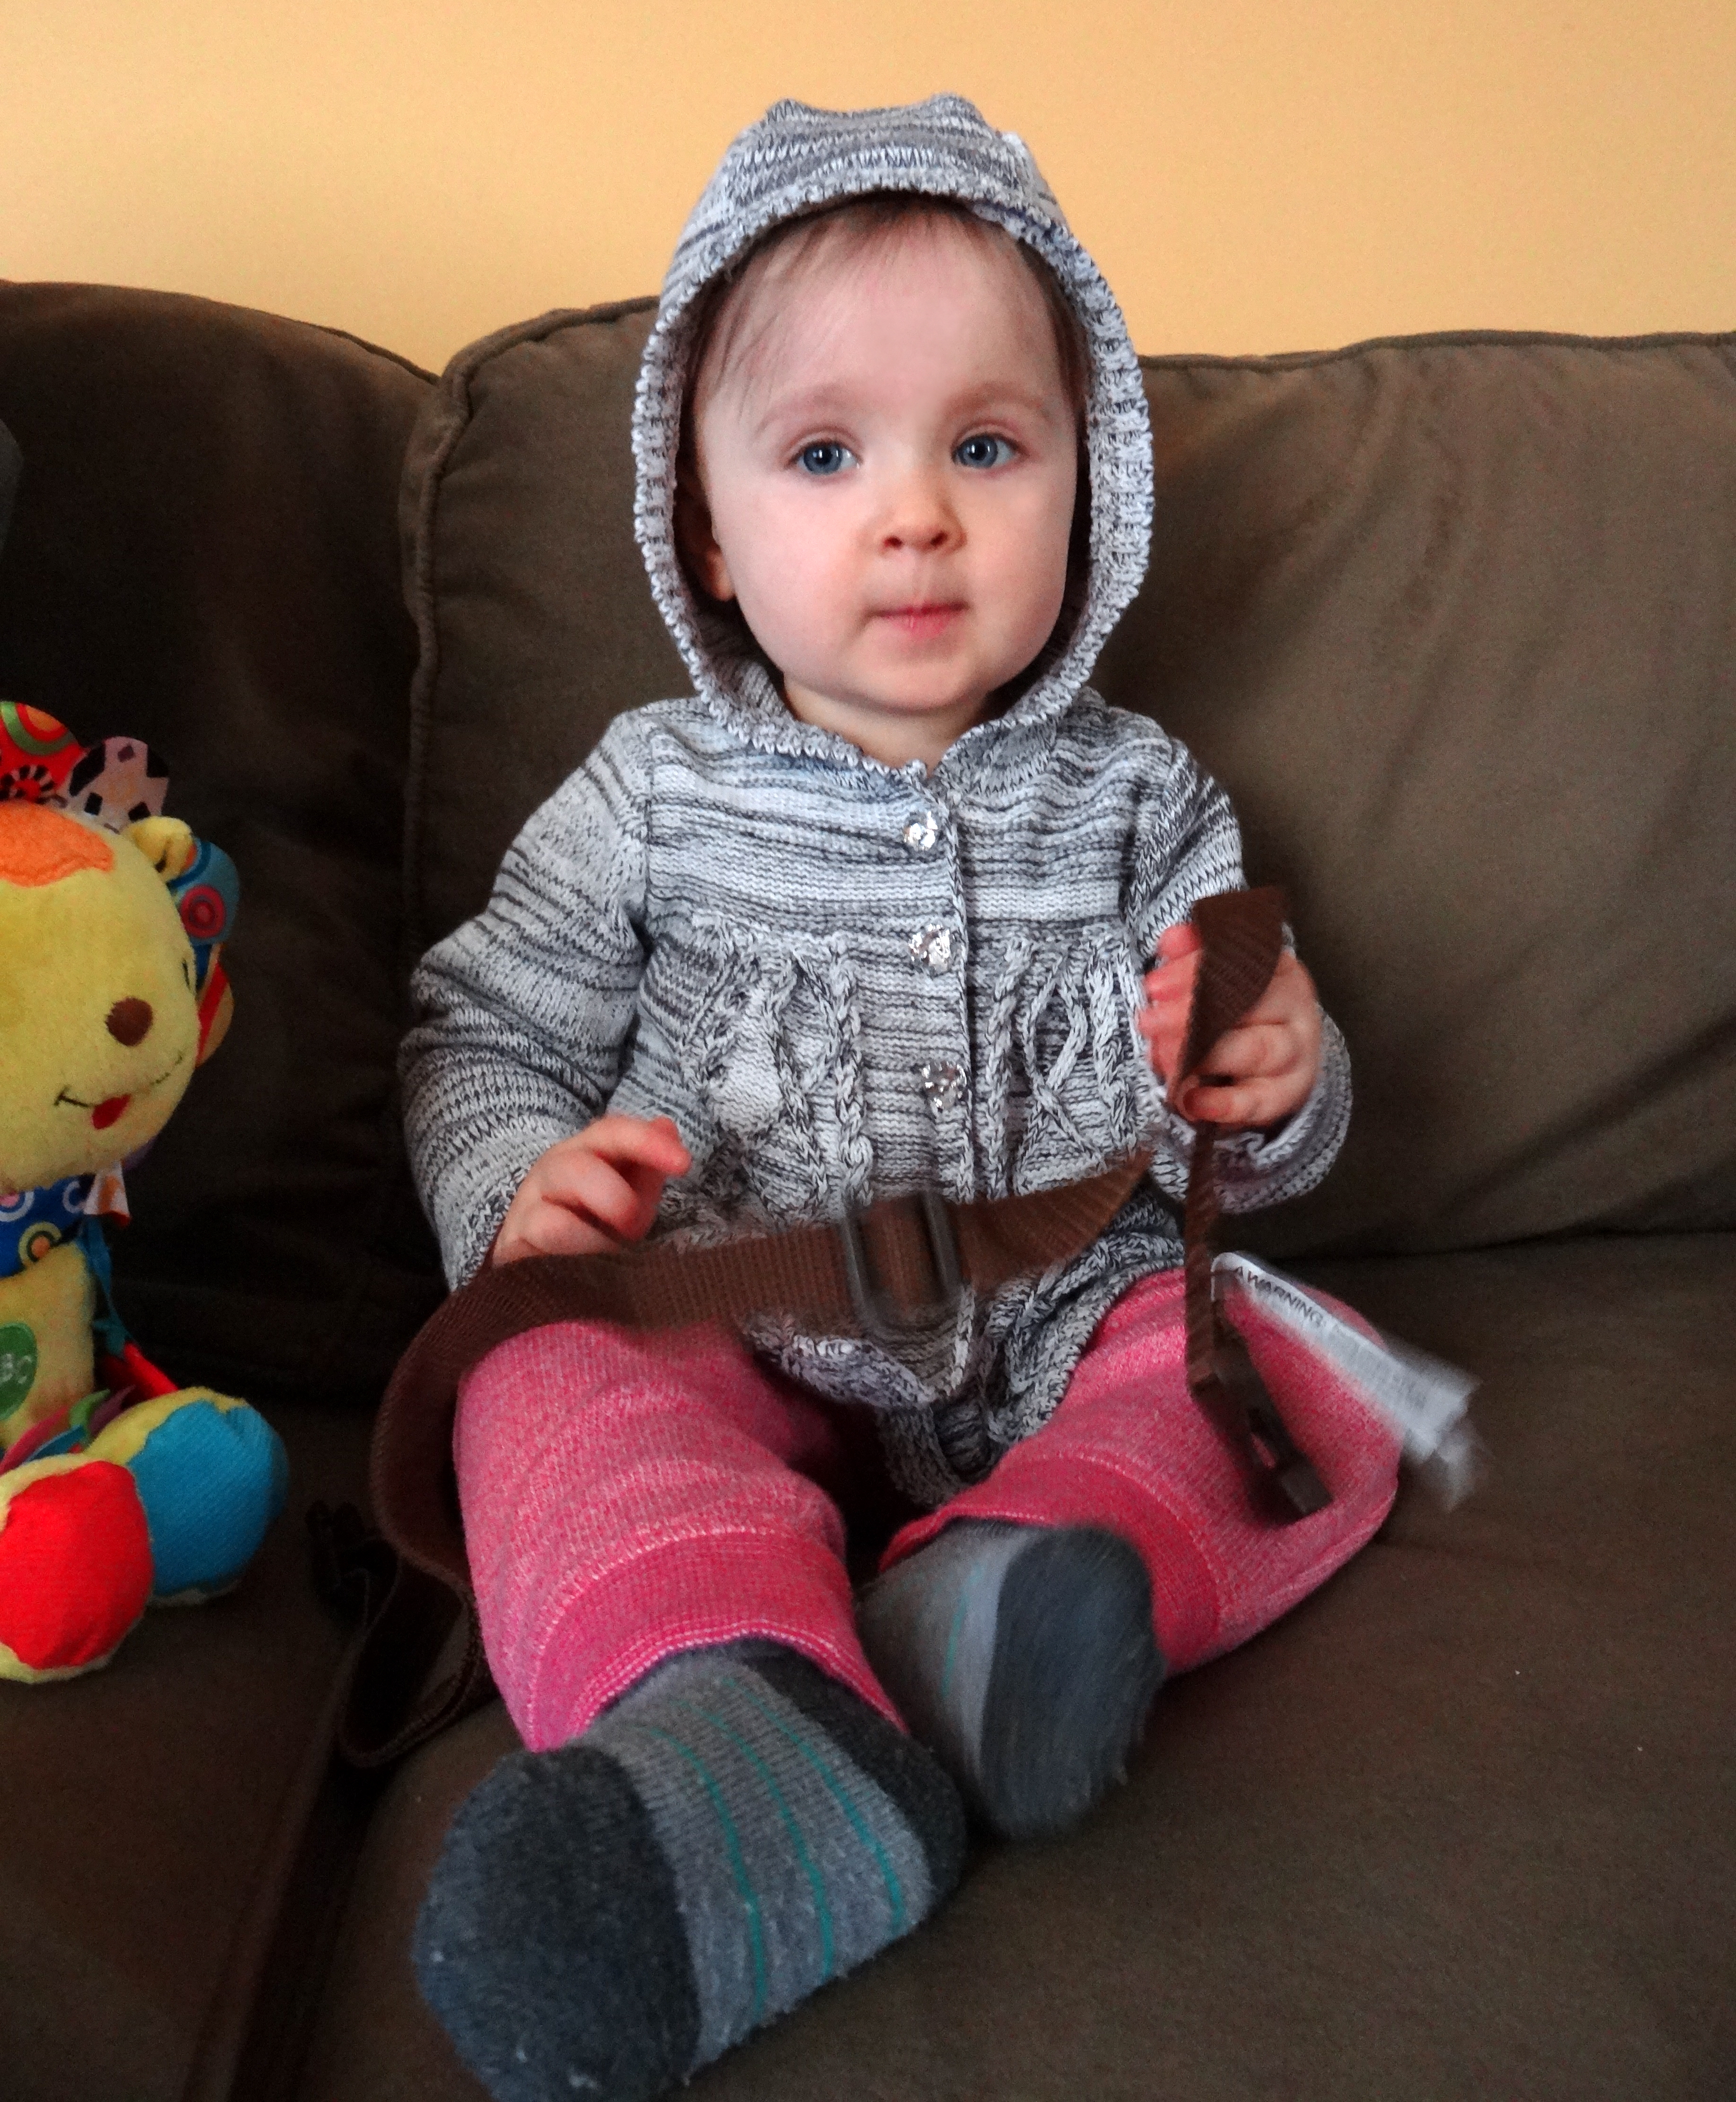 Baby bundled up and ready to to outside